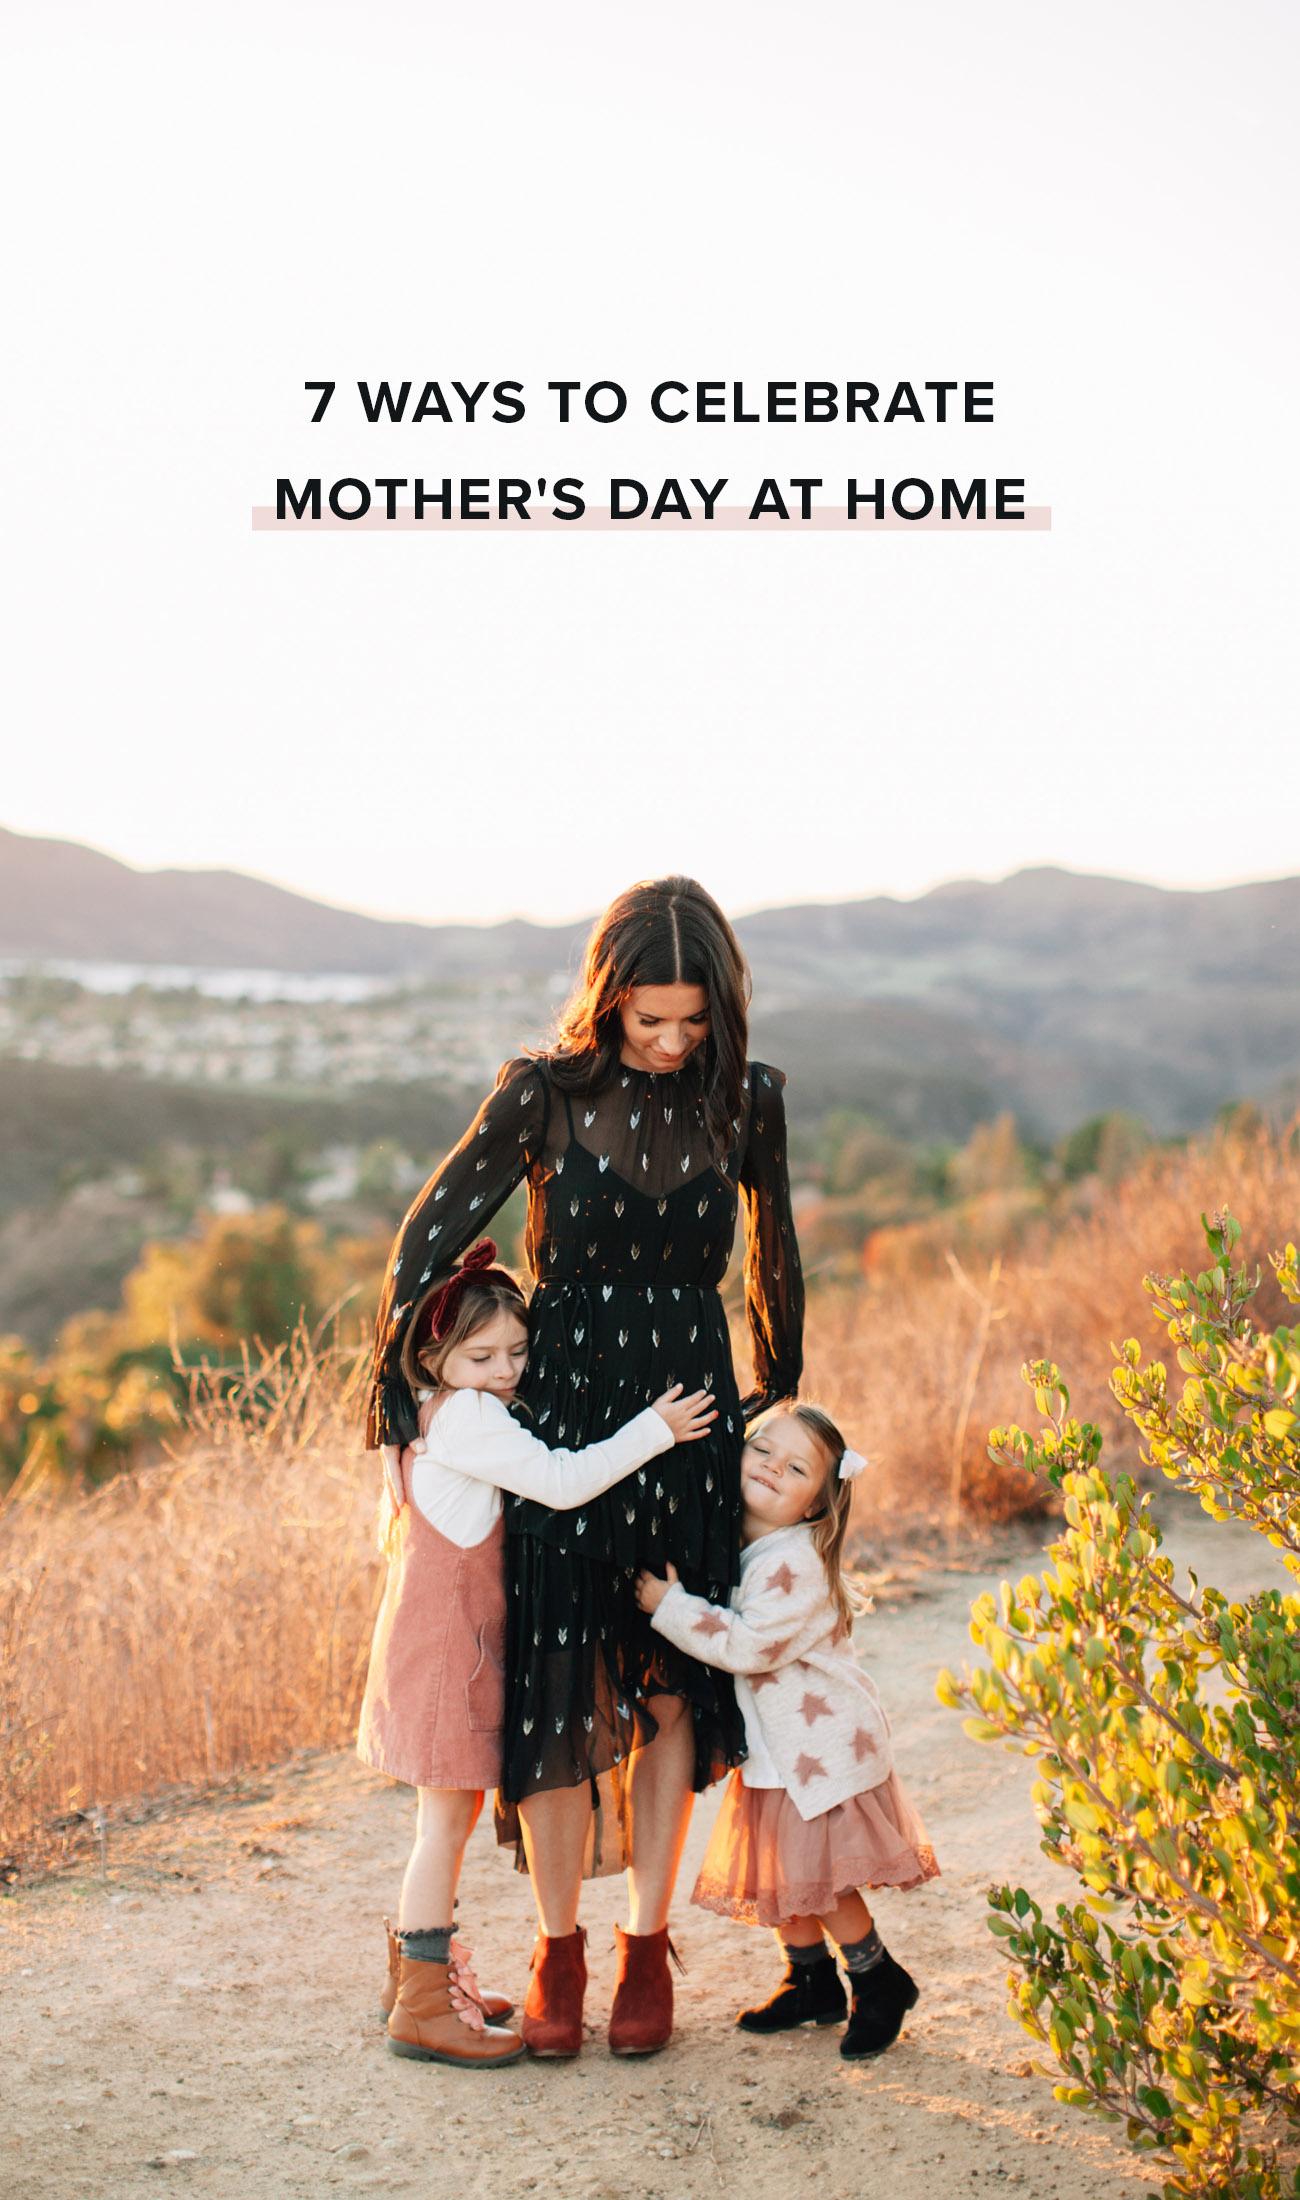 7 Ways to Celebrate Mother's Day at Home